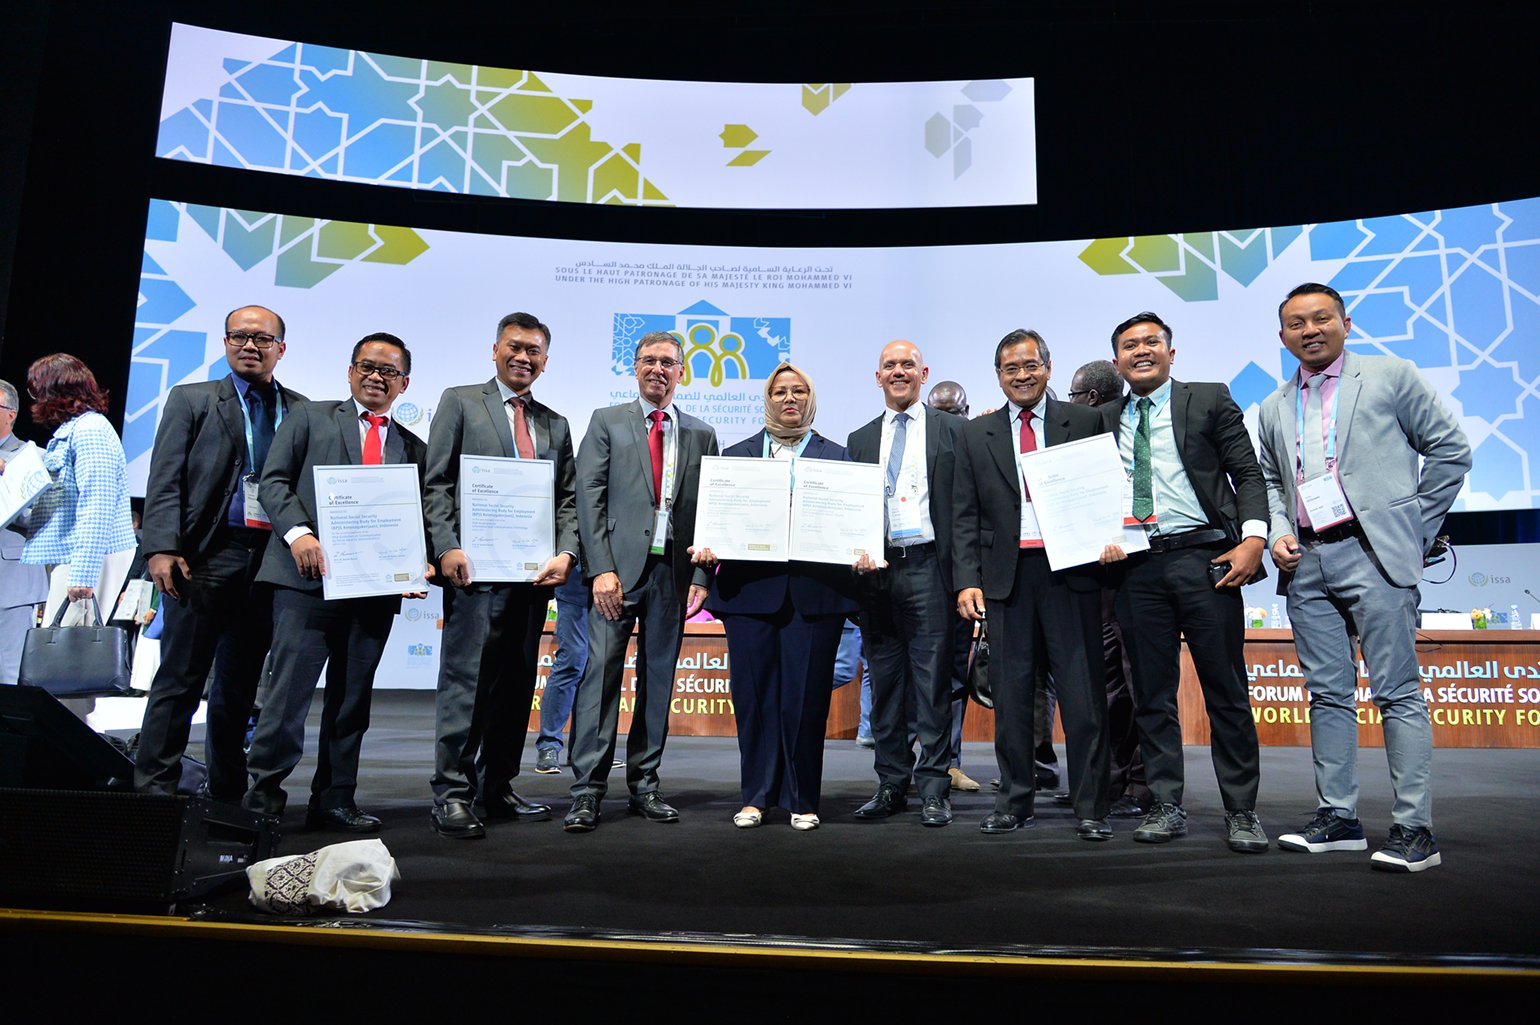 BPJS Ketenagakerjaan, Indonesia received five Certificates of Excellence at the World Social Security Forum 2022